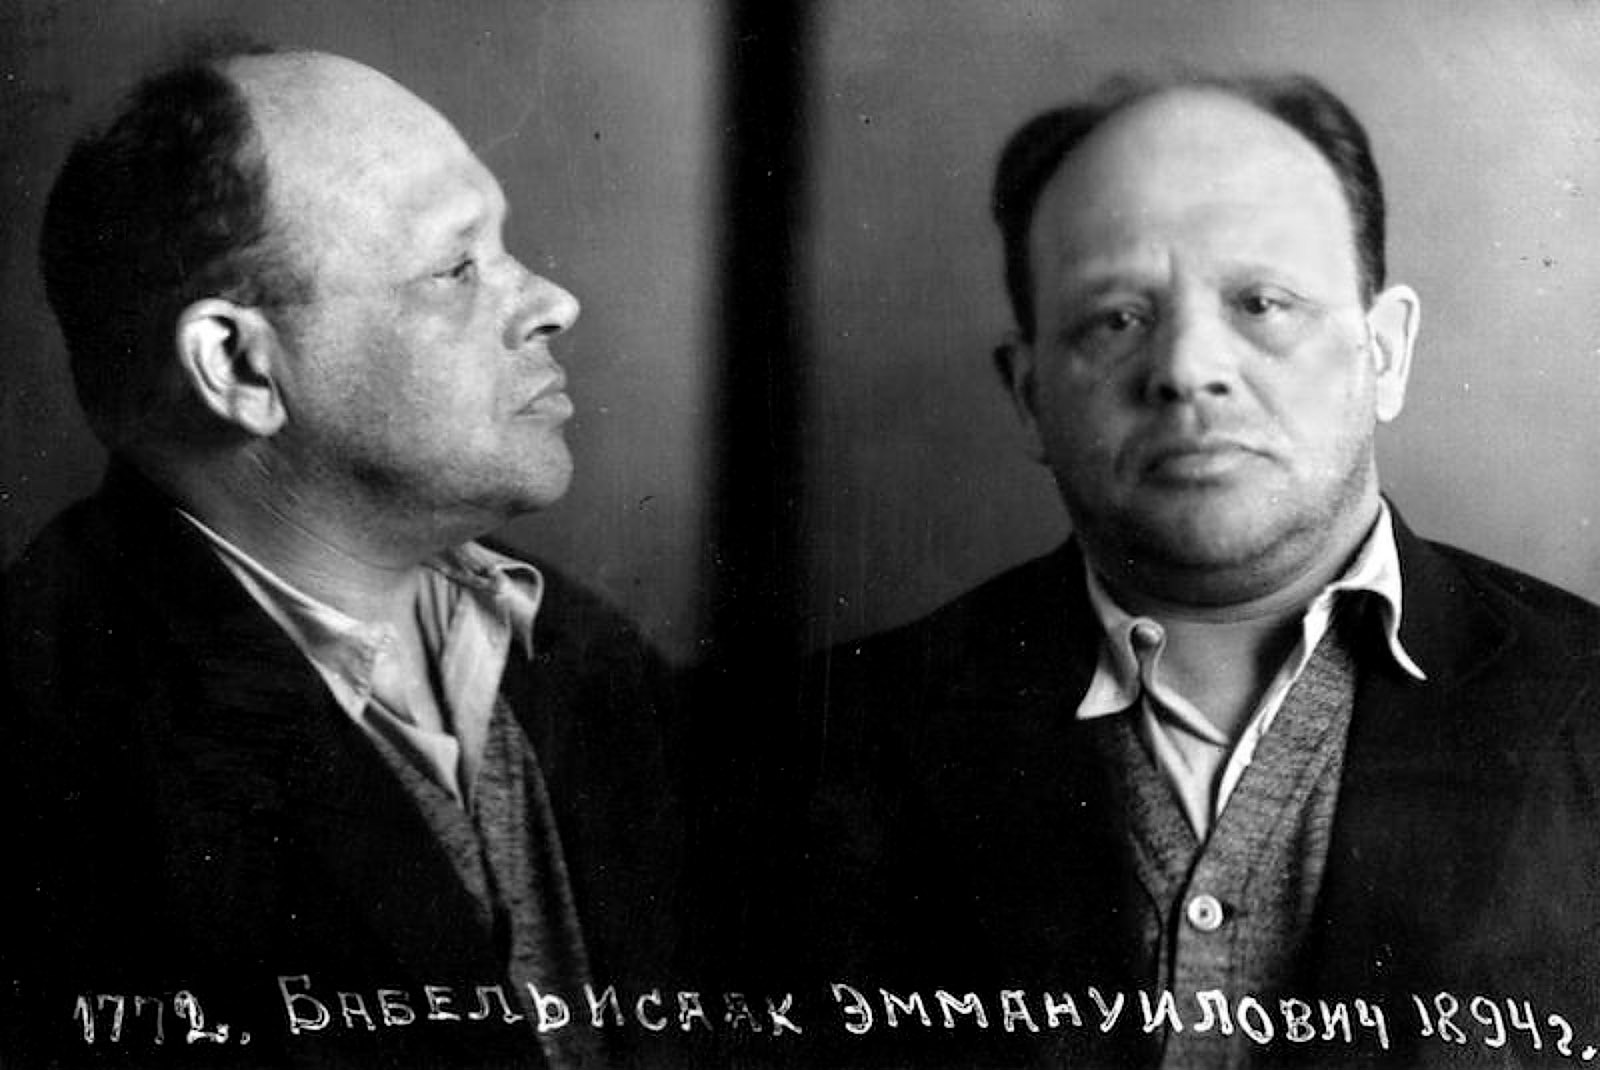 A photograph of Isaac Babel taken by the NKVD after his arrest, circa 1939